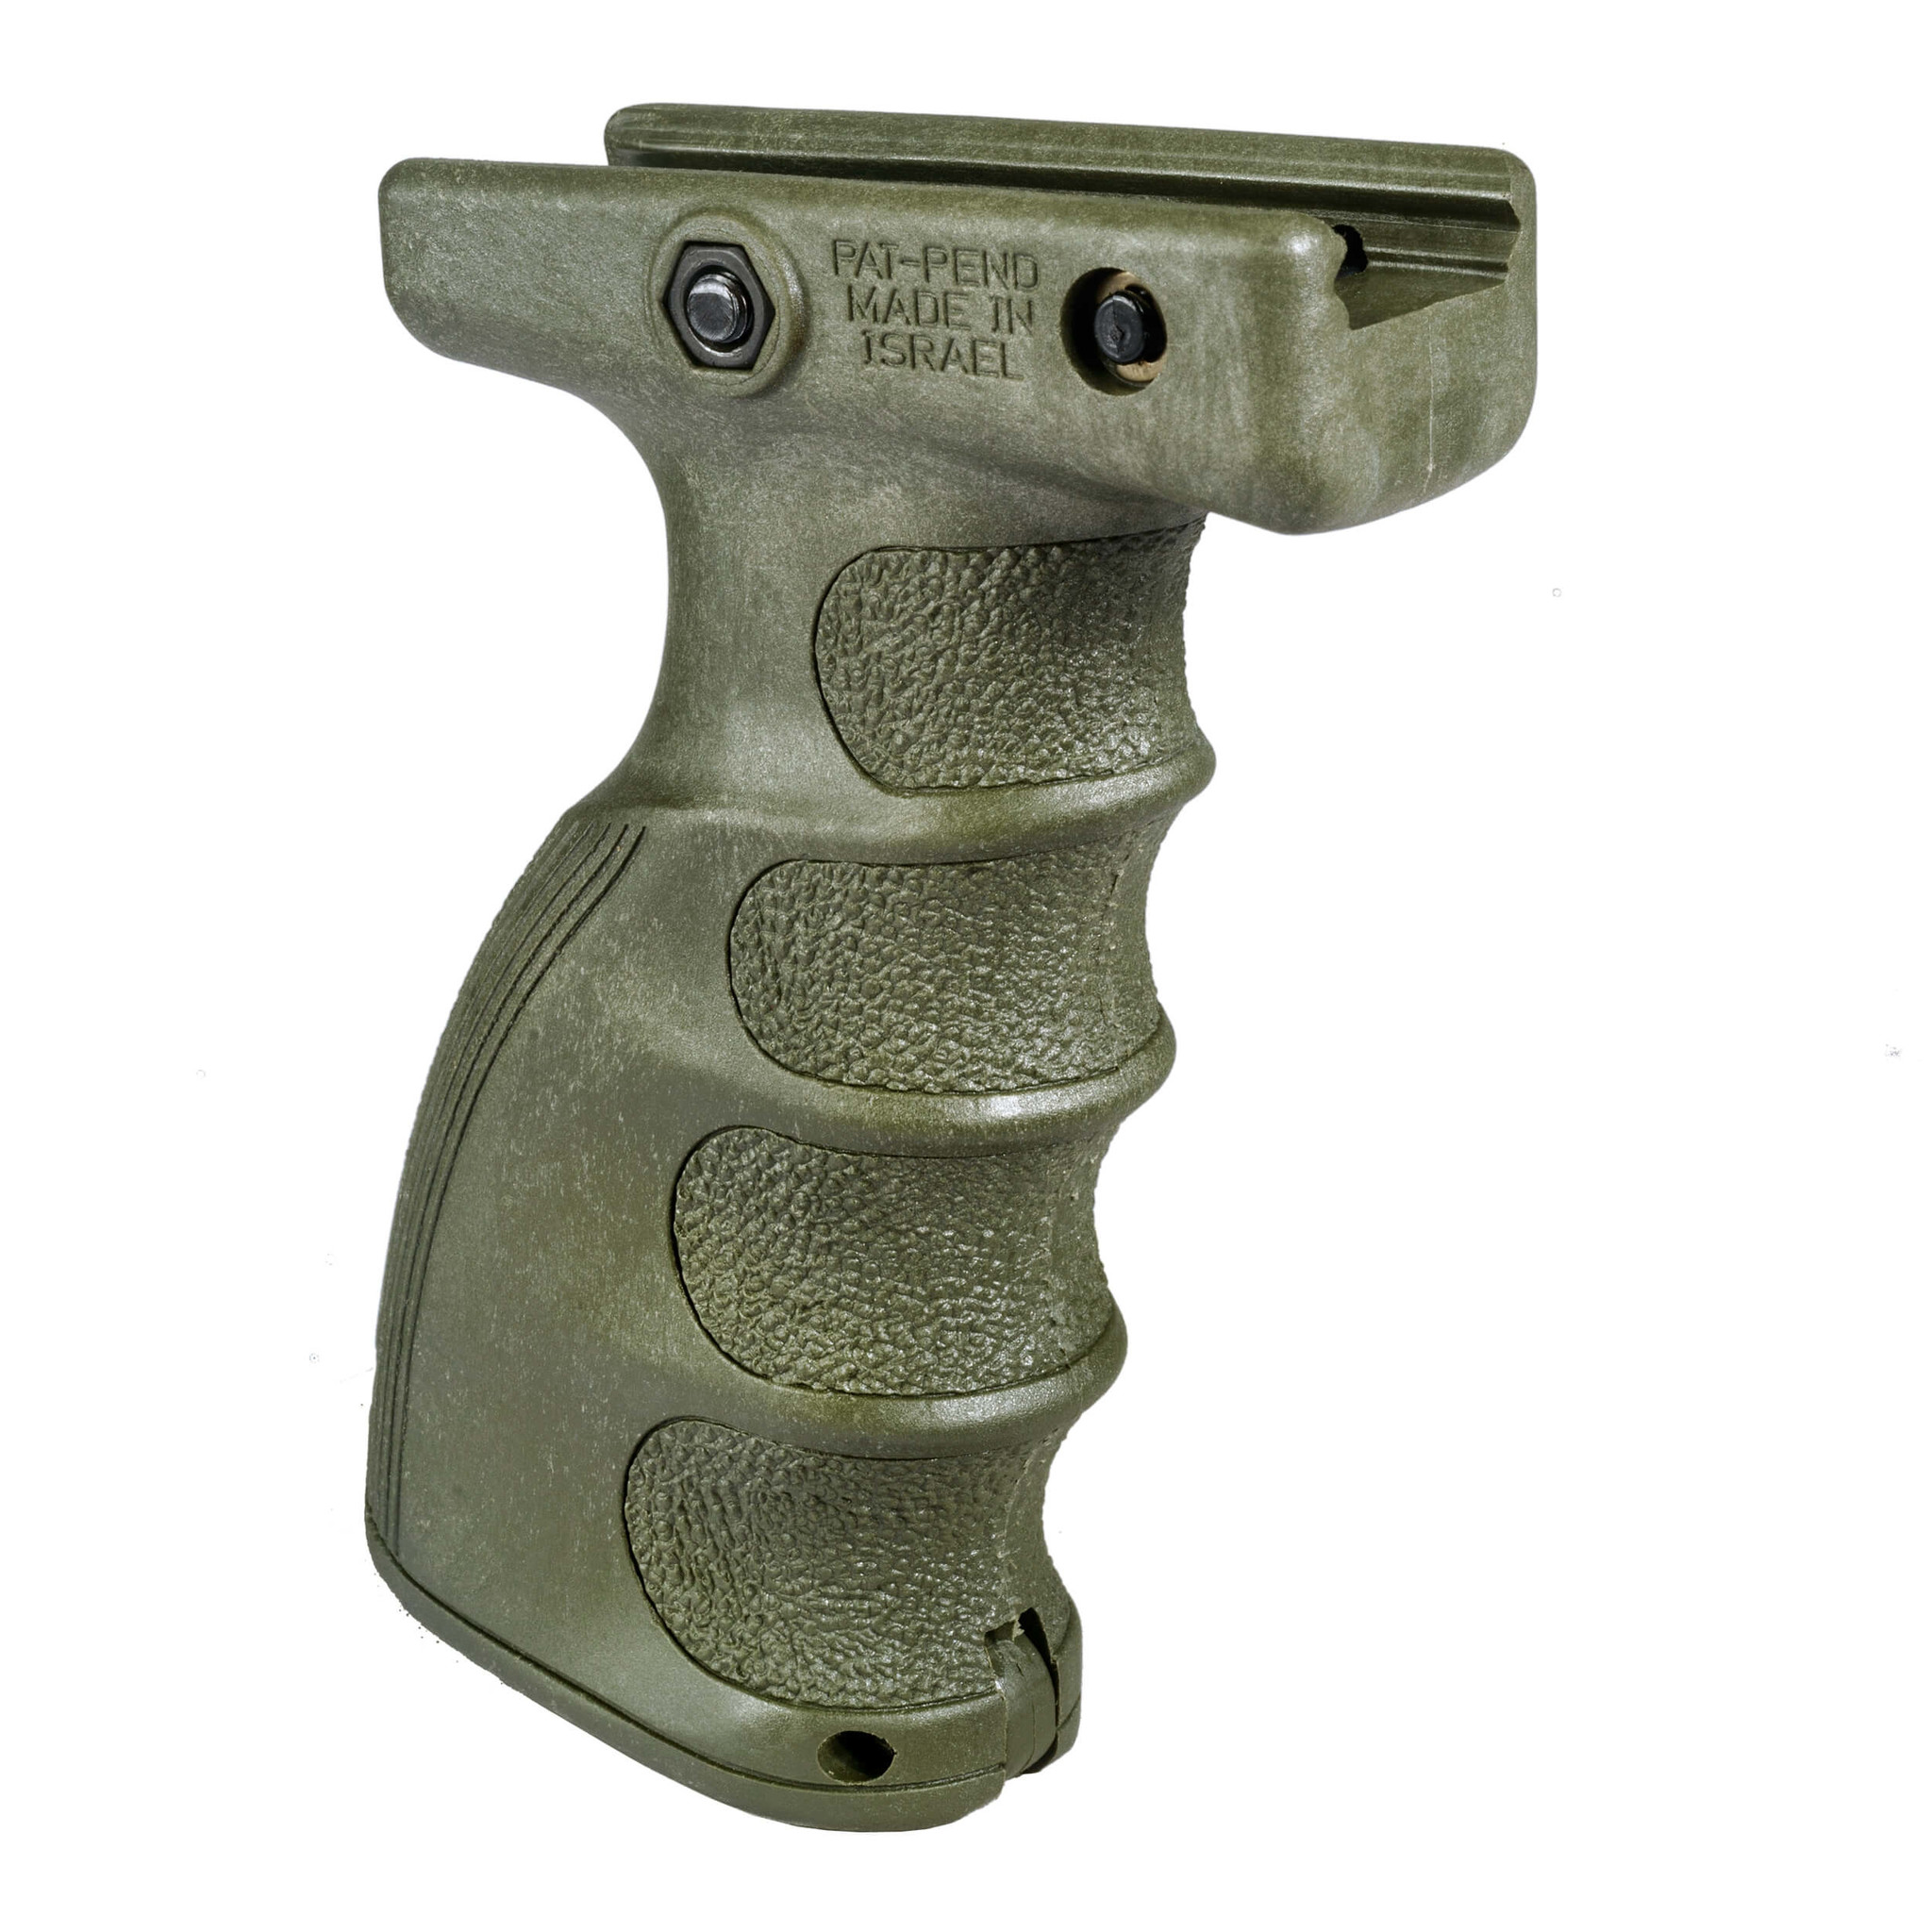 FAB Defense AG-44S Quick Release Ergonomic Foregrip - OD